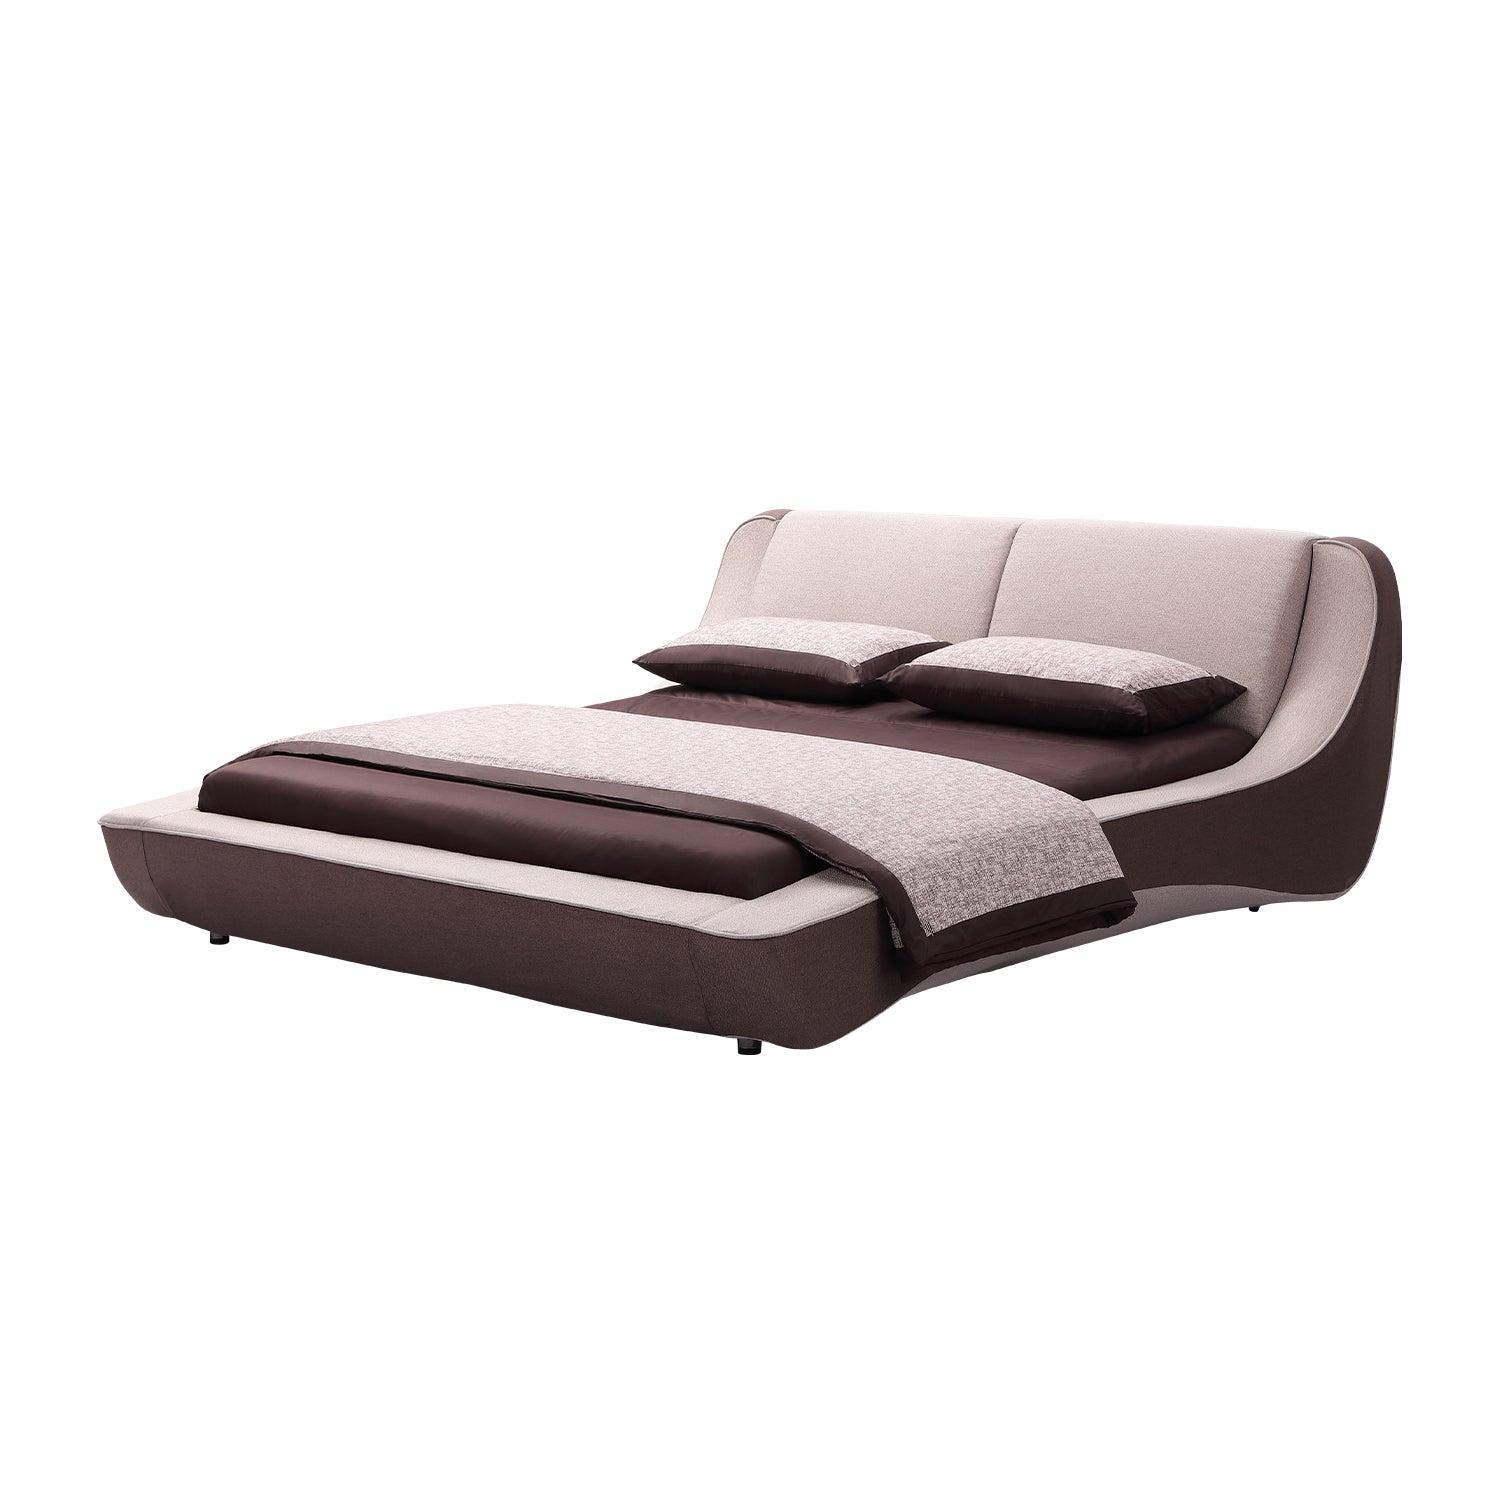 Stylish bed frame BZZ4 - 198 with beige cushions and brown exterior, inspired by sports car design, featuring a bold color contrasting design. Includes matching brown and beige pillows and blankets.